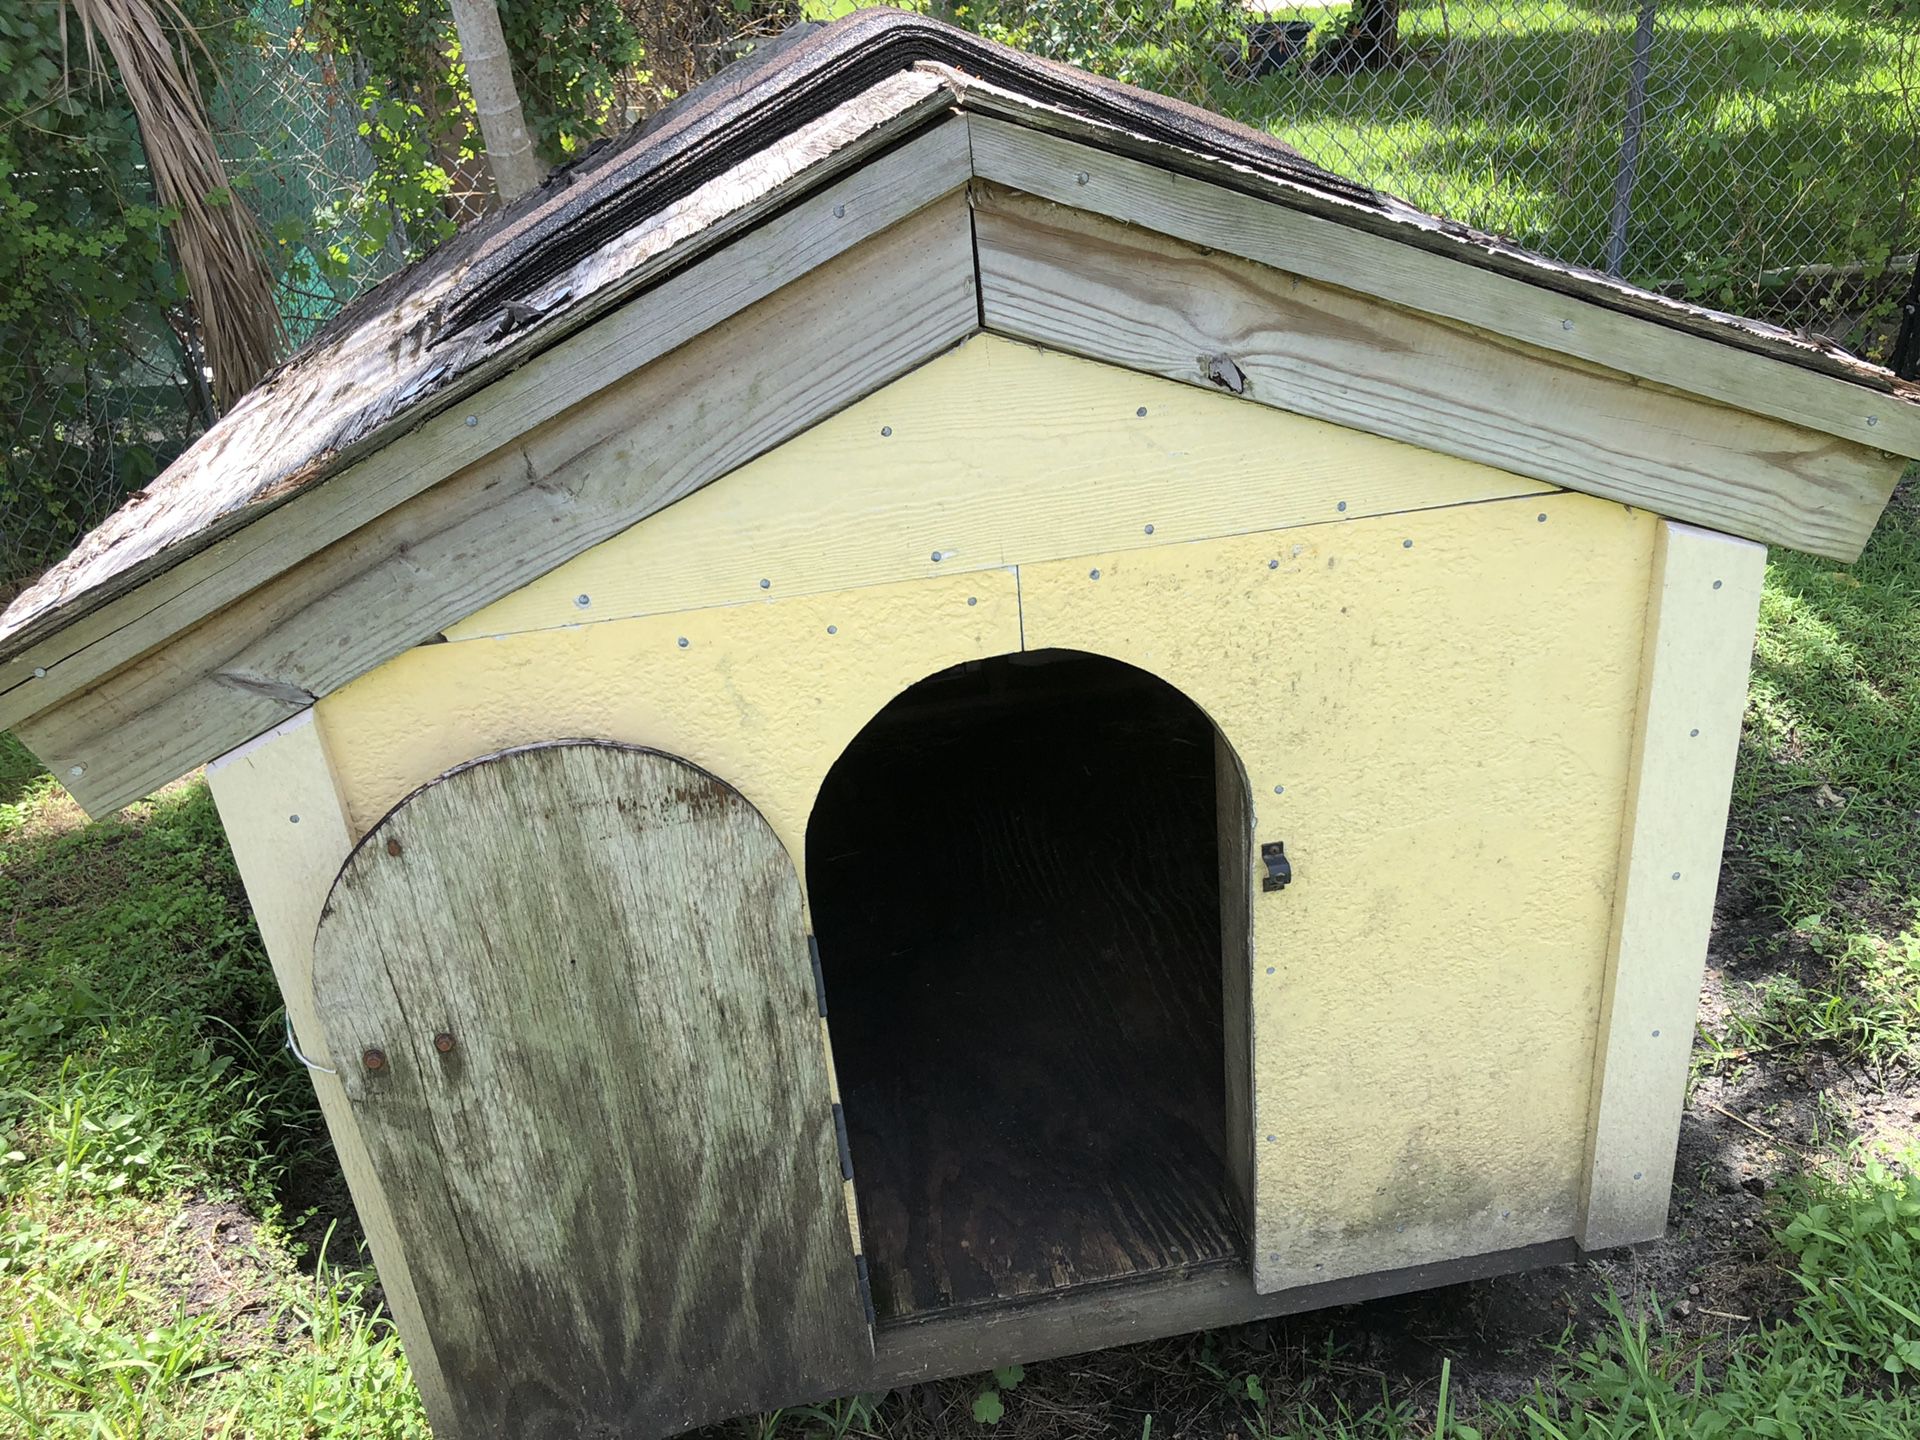 I had this house built for my dog the Roof needs to be fix but it does not get wet inside the house has front door & back door it is a big house for.